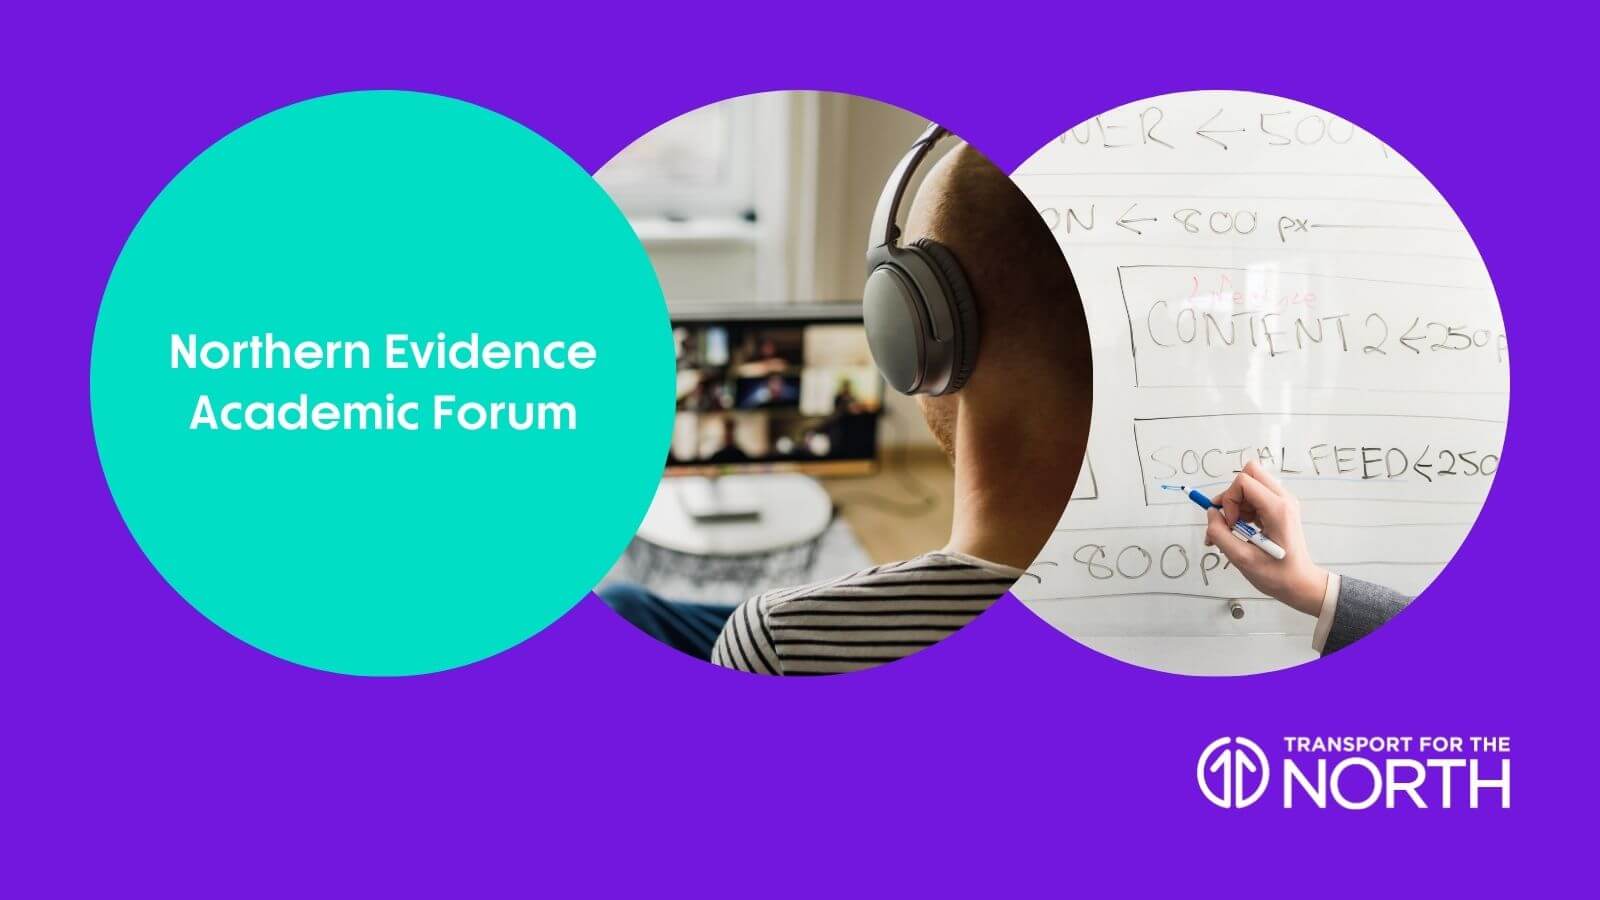 Northern Evidence Academic Forum launched to help inform transport investment decisions